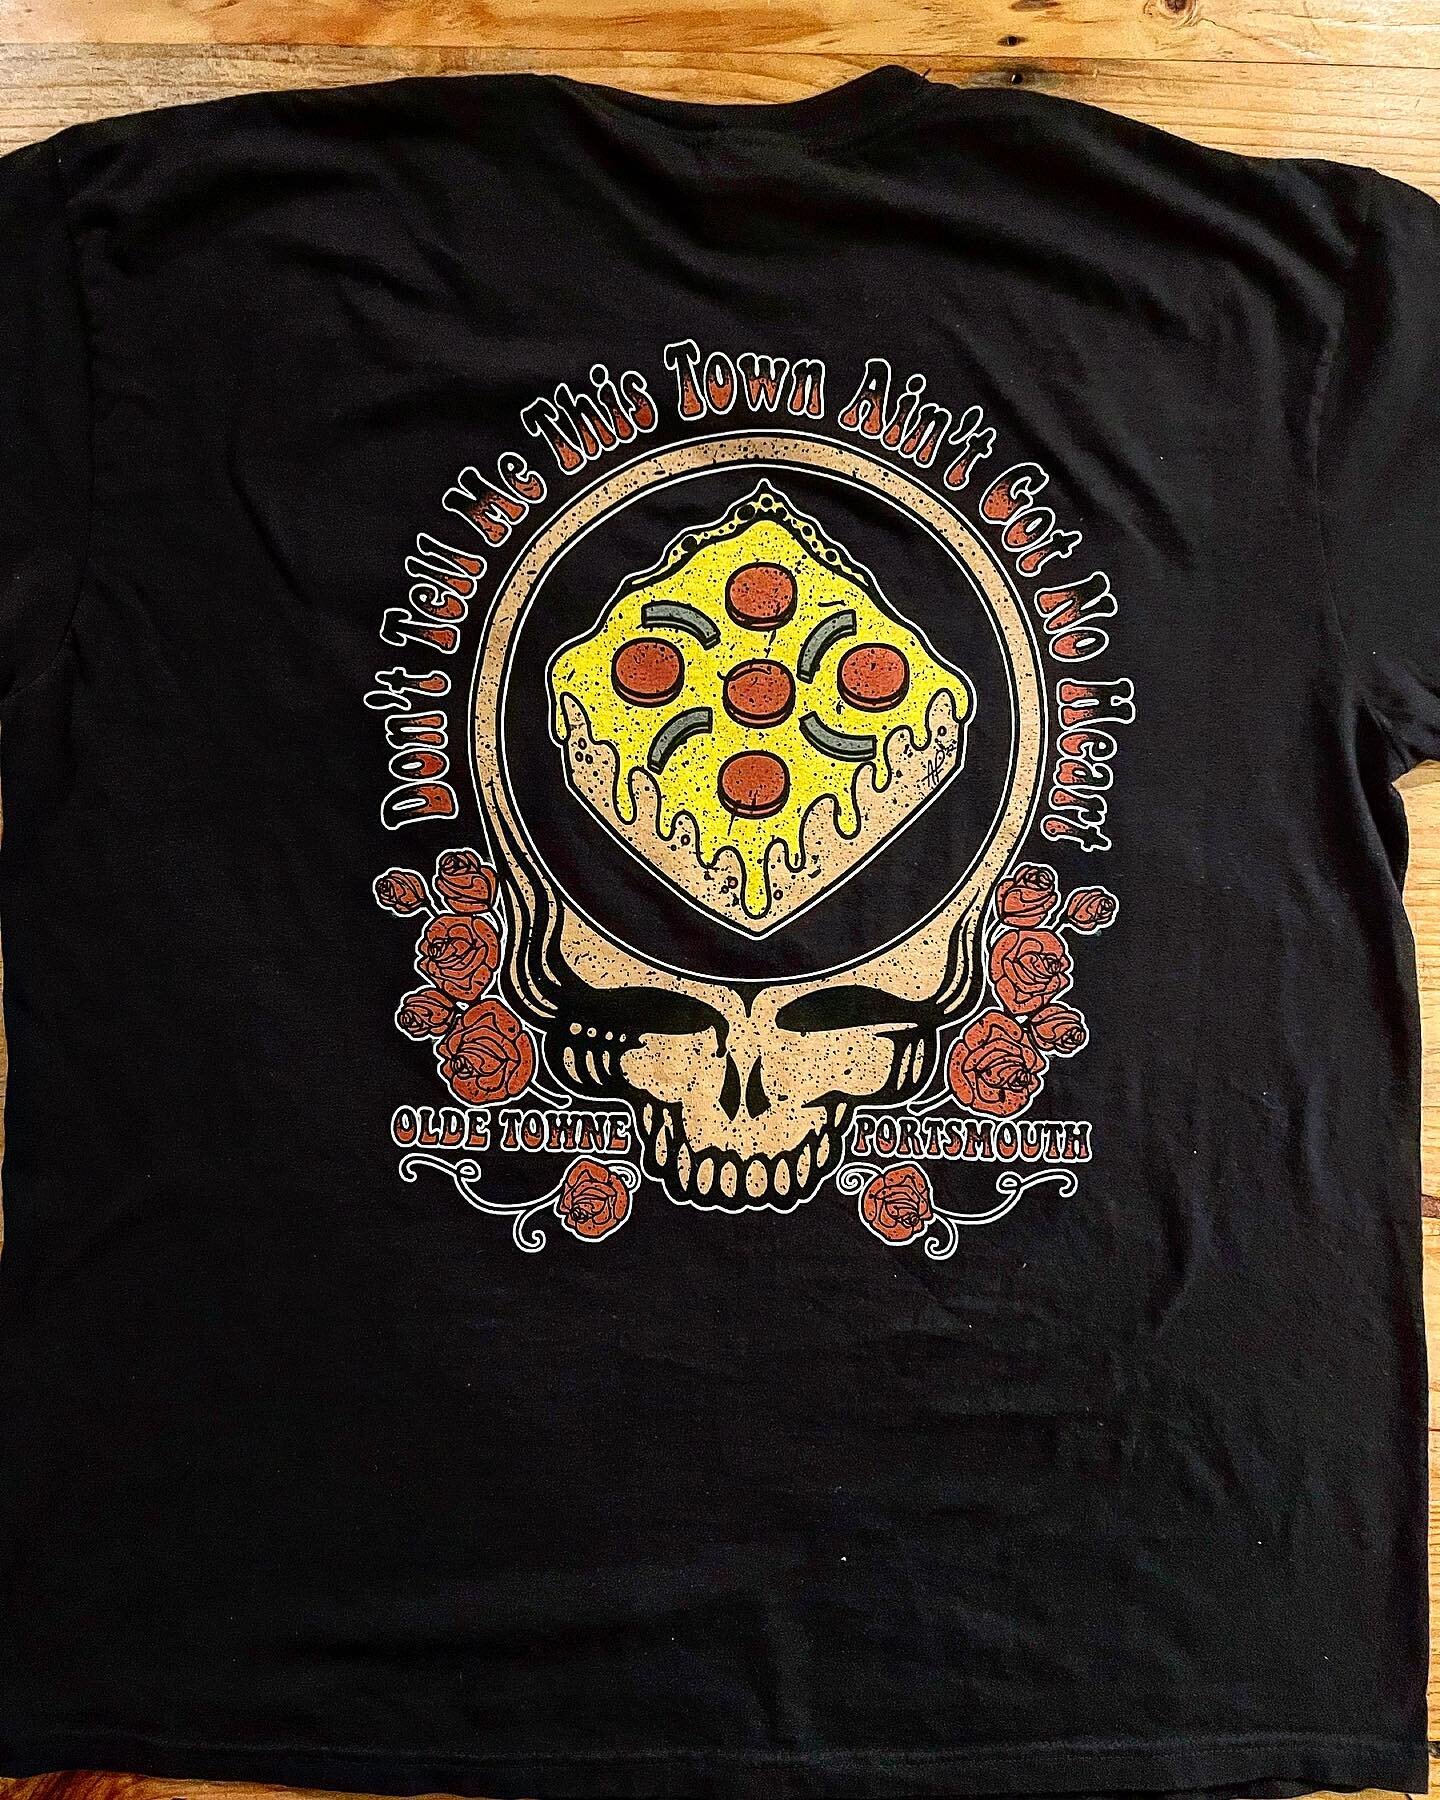 We love three things deeply: Square Pizza, Portsmouth and the Grateful Dead.  Do not sleep on this limited run of  T-shirts and Sweat Shirts! Y&rsquo;all know the deal, once they are gone they are gone! ⚡️💀✌🏻